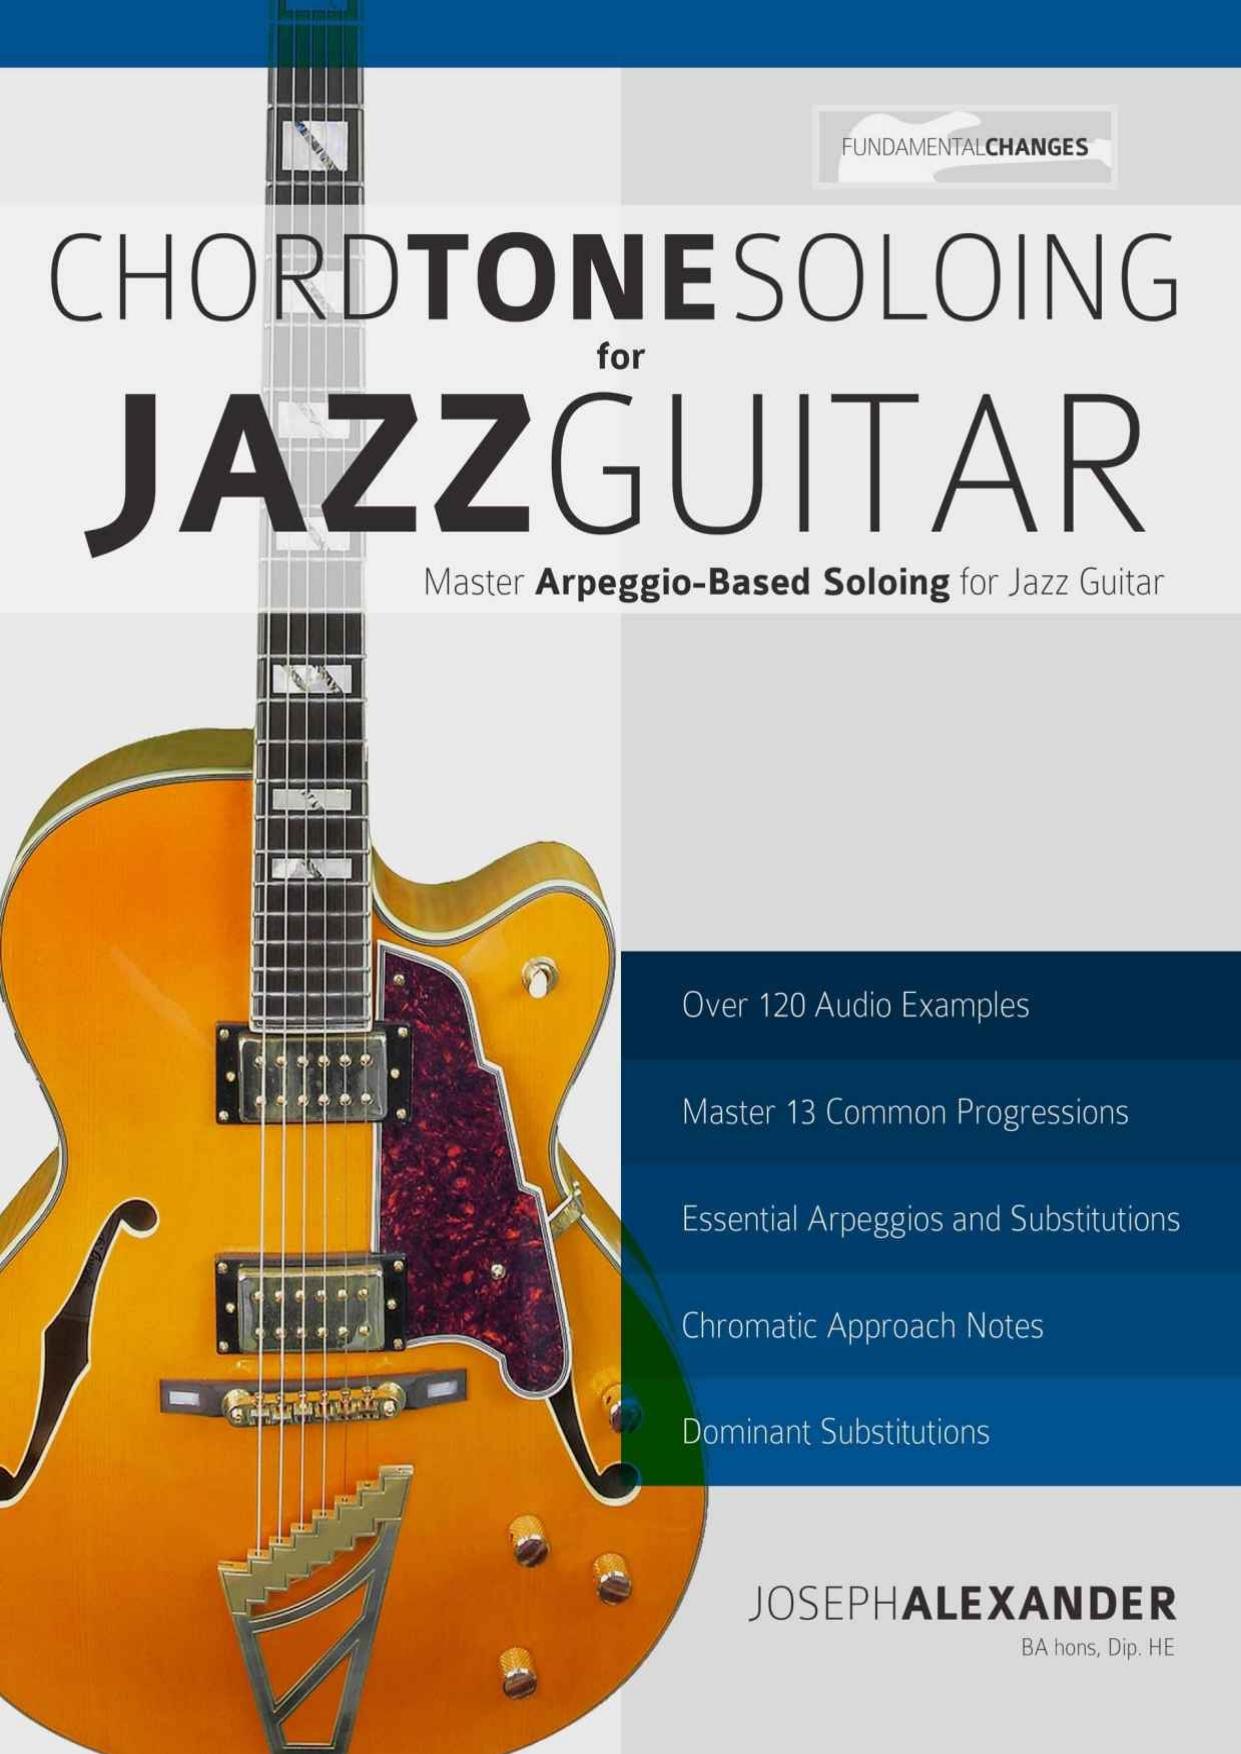 Chord Tone Soloing for Jazz Guitar: Master Arpeggio-Based Soloing for Jazz Guitar